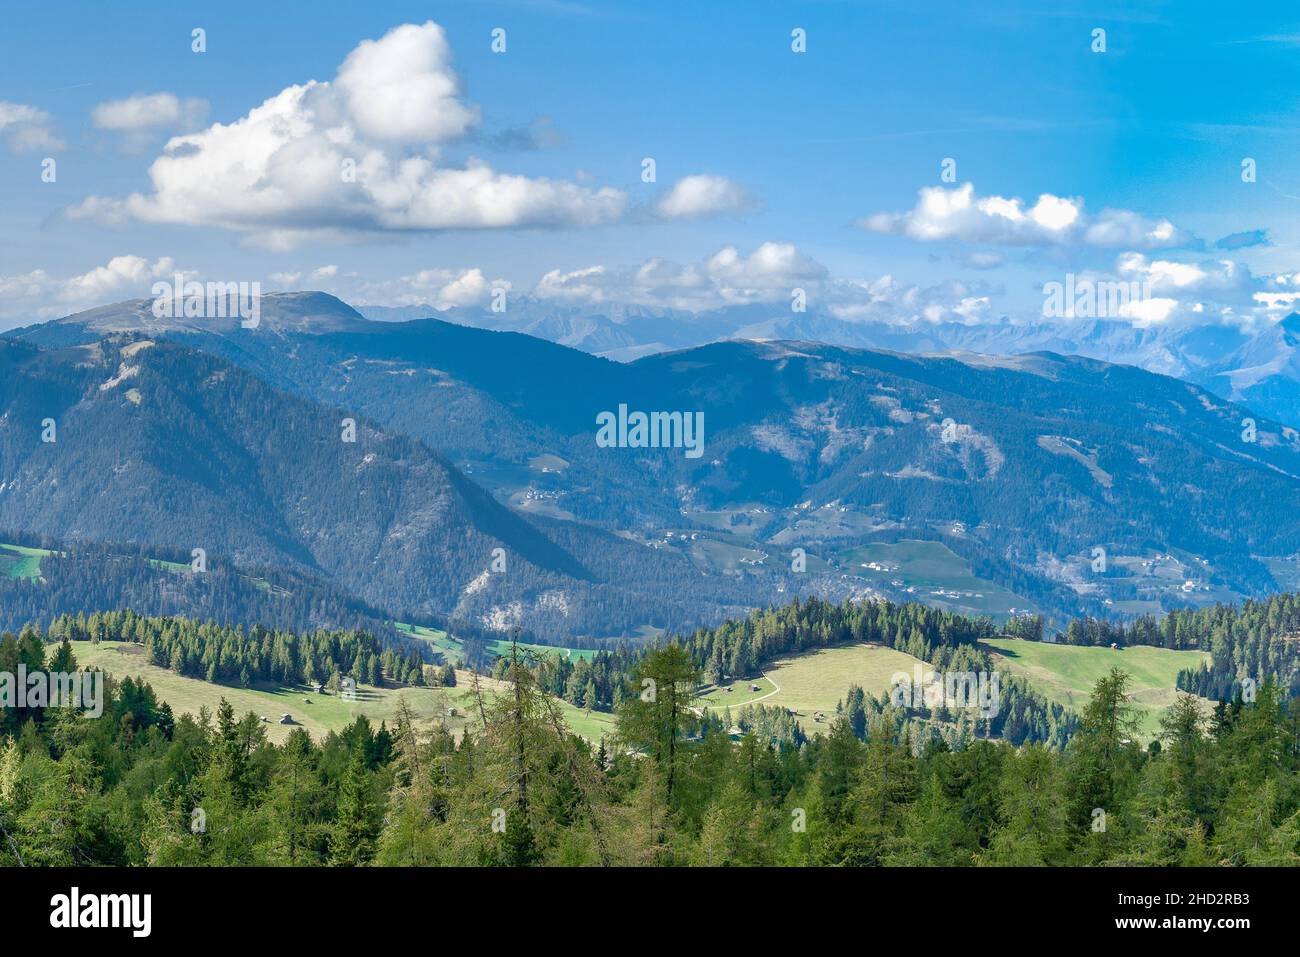 Overlooking the Puez-Geisler nature park mountains in the Dolomites seen from the Armentara meadows Stock Photo